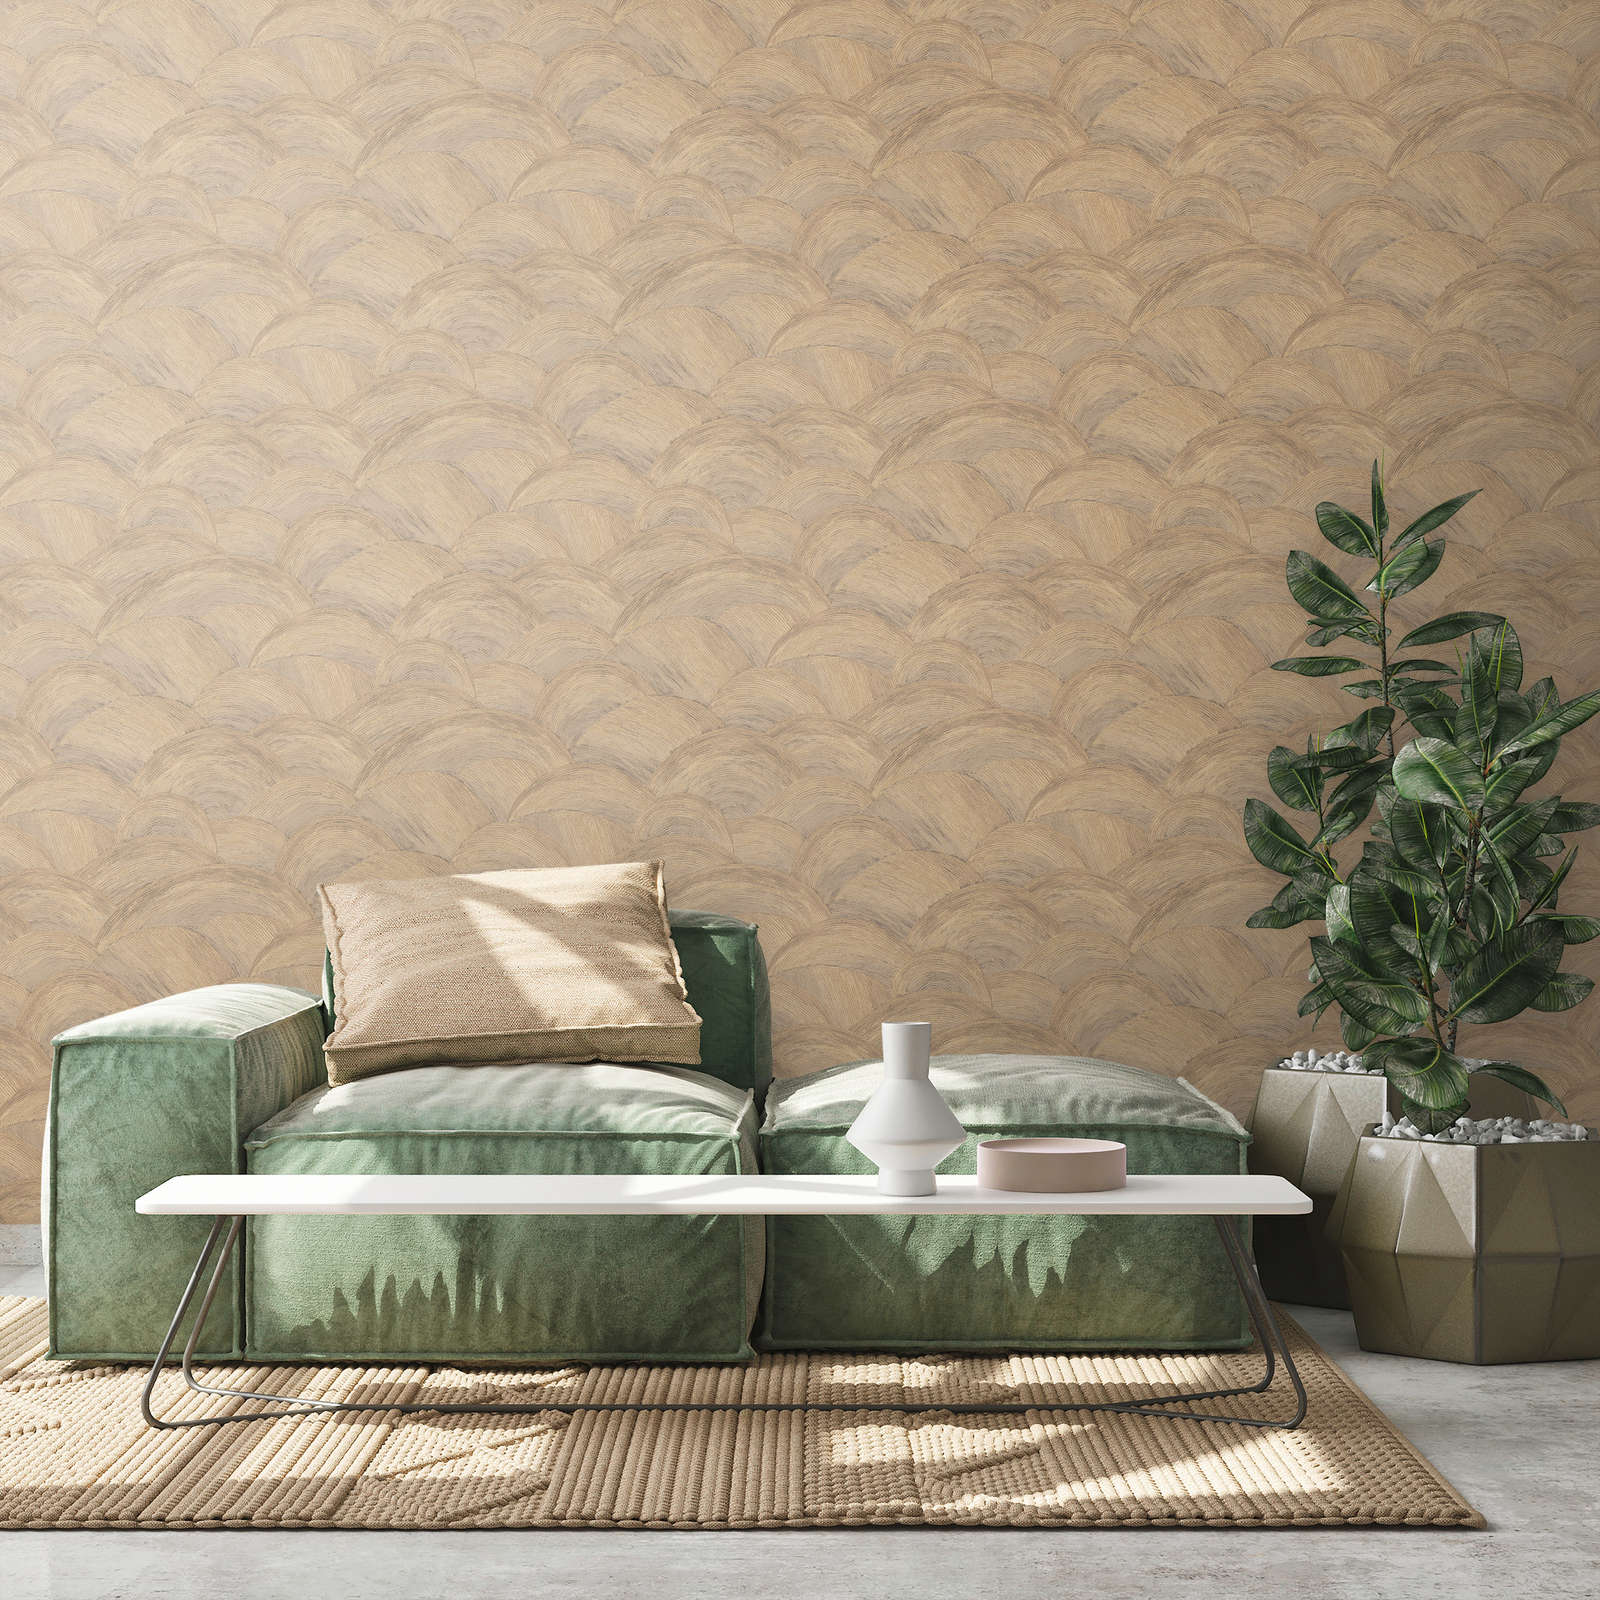             Non-woven wallpaper with shiny wave pattern - beige, brown, gold
        